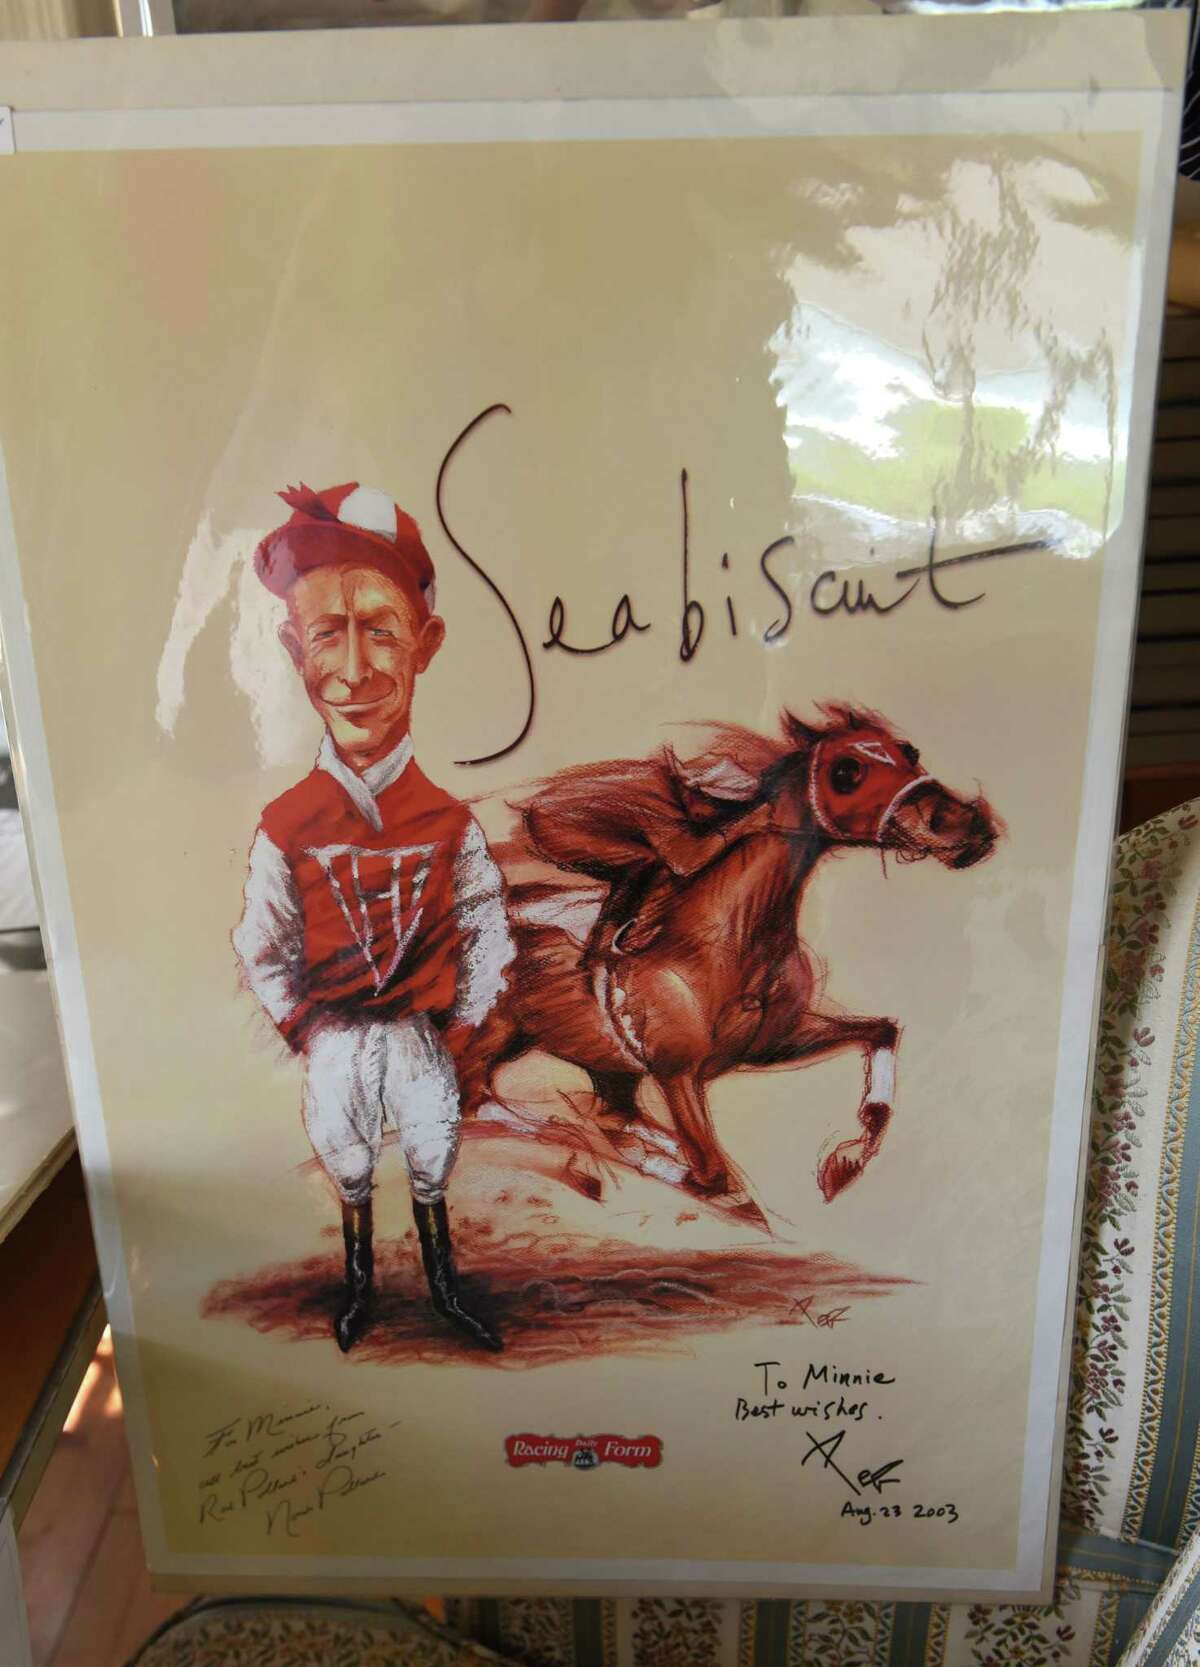 Caricatures will be for sale at the Saratoga collection of Minnie Clark Bolster estate sale Aug. 9, 2018 in Saratoga Springs, N.Y. The sale will take place Friday through Sunday. (Lori Van Buren/Times Union)